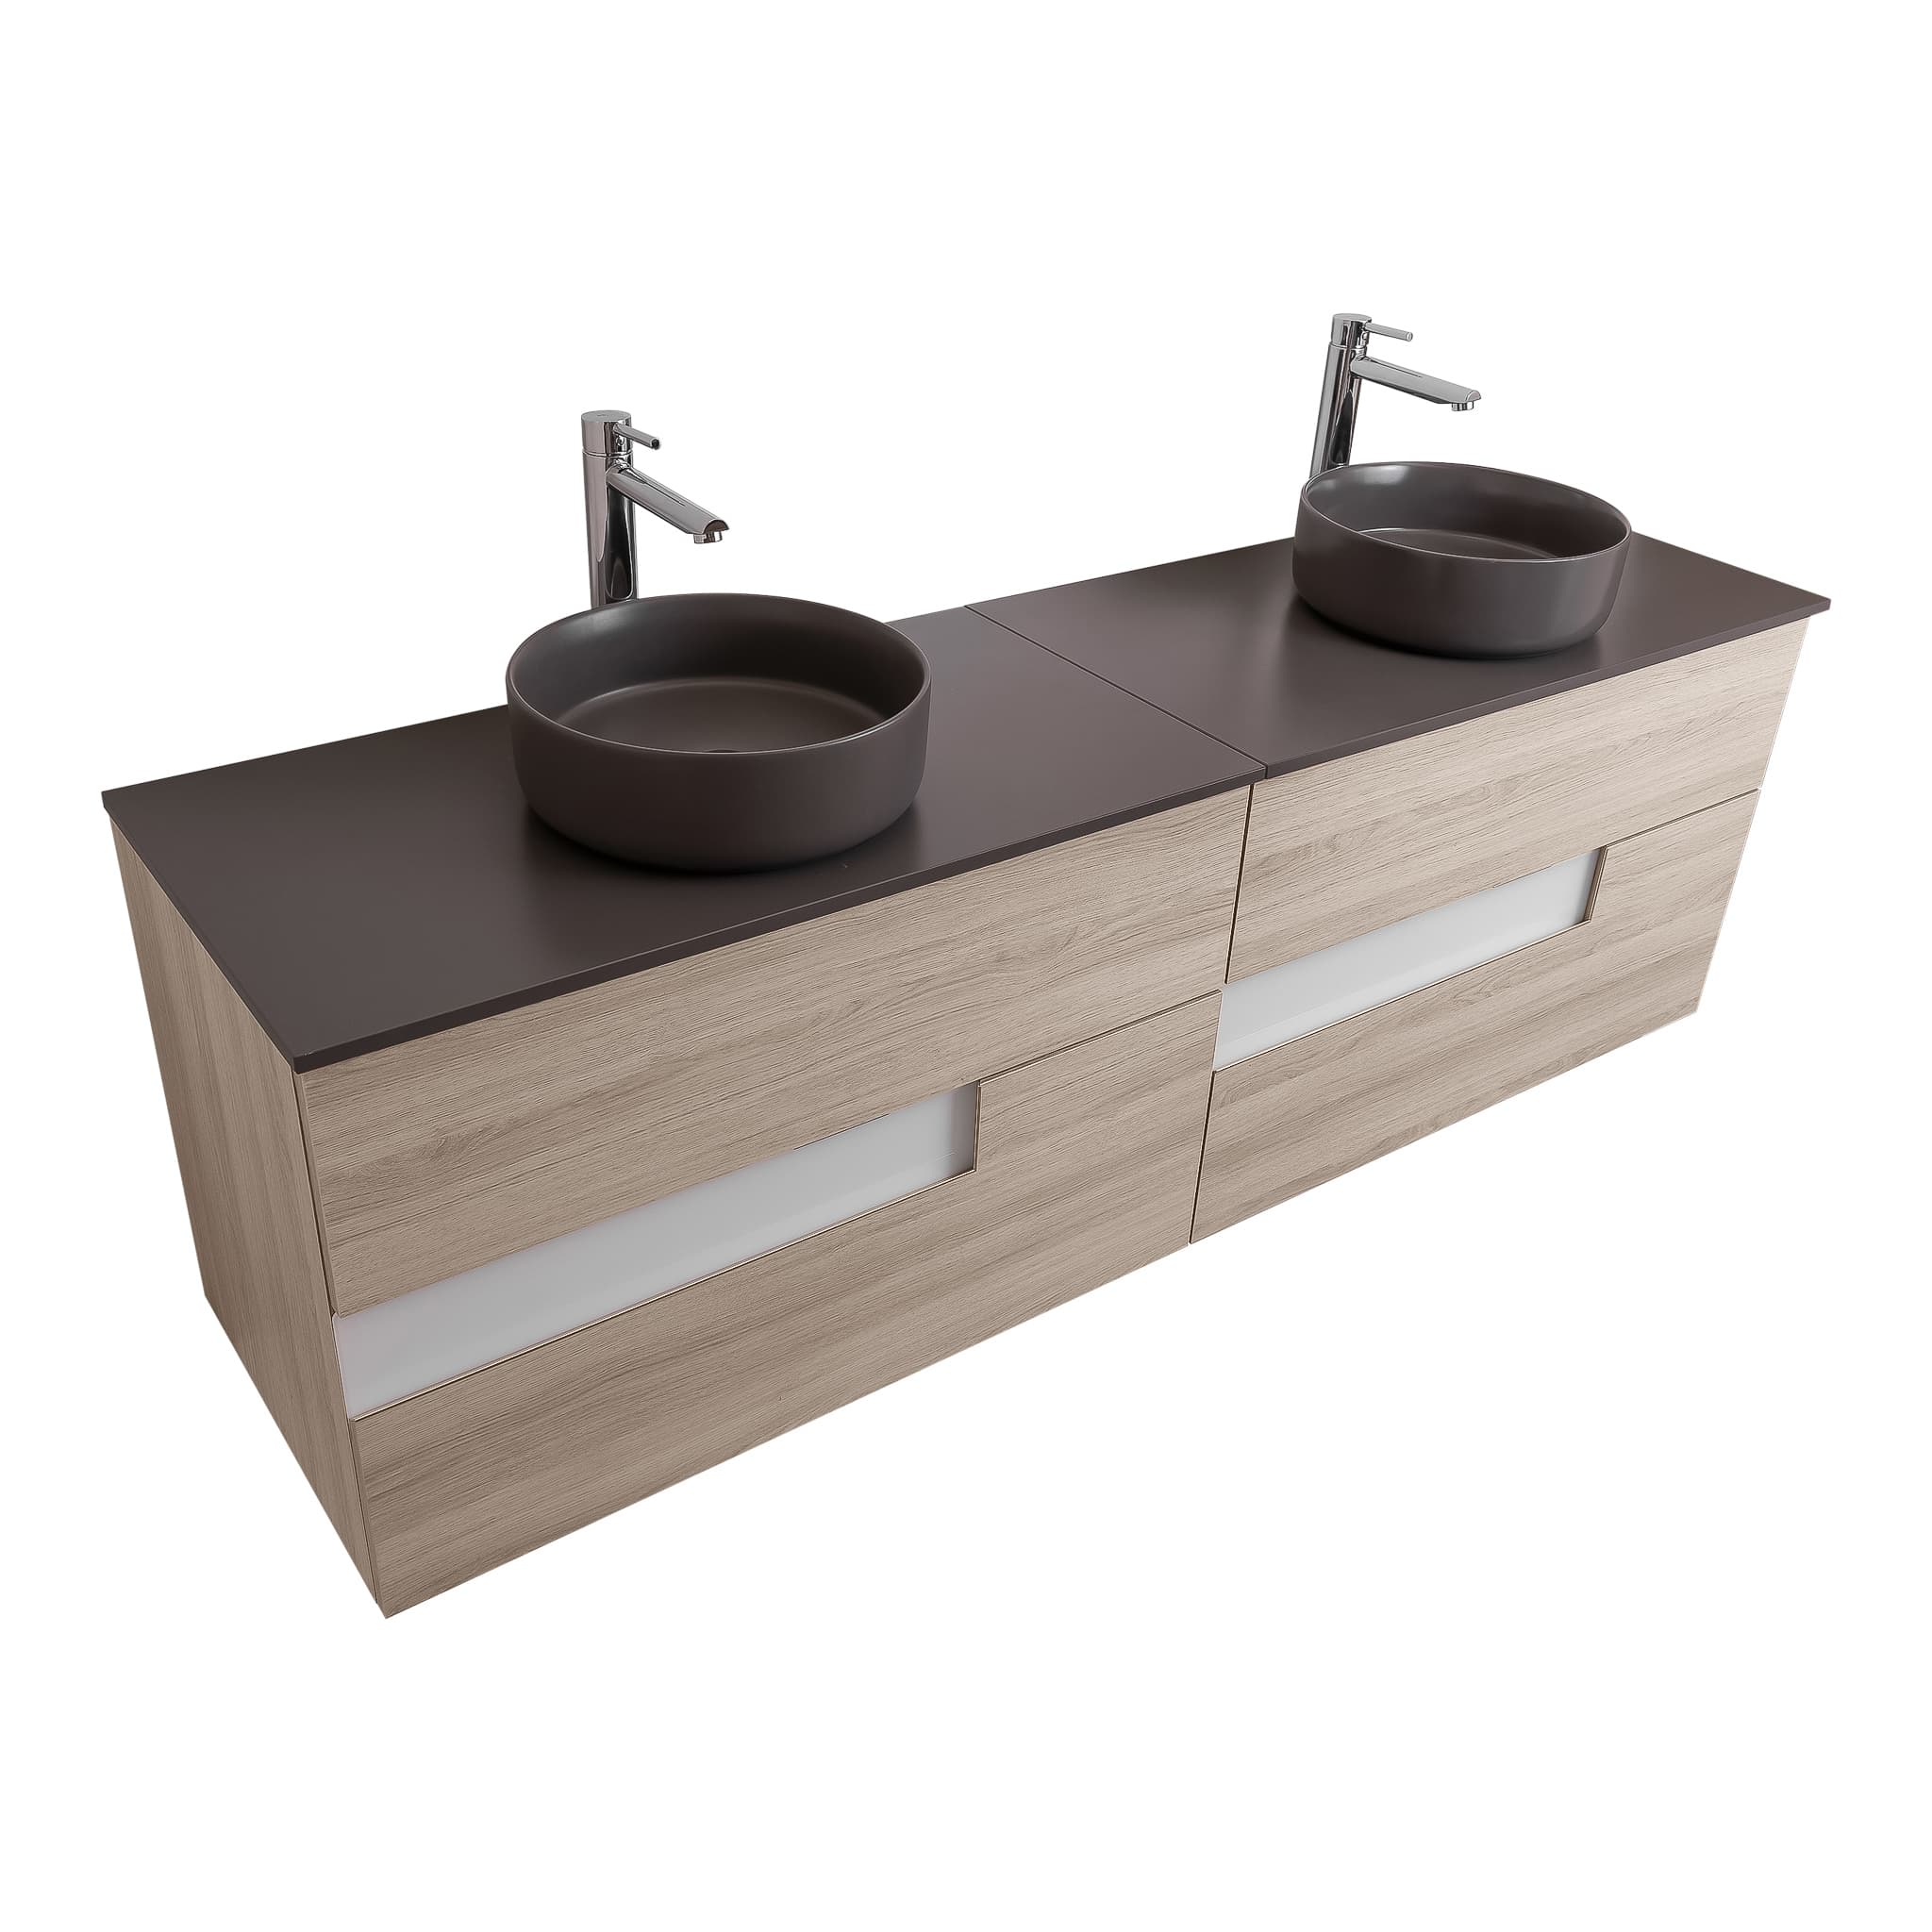 Vision 63 Natural Light Wood Cabinet, Ares Grey Ceniza Top And Two Ares Grey Ceniza Ceramic Basin, Wall Mounted Modern Vanity Set